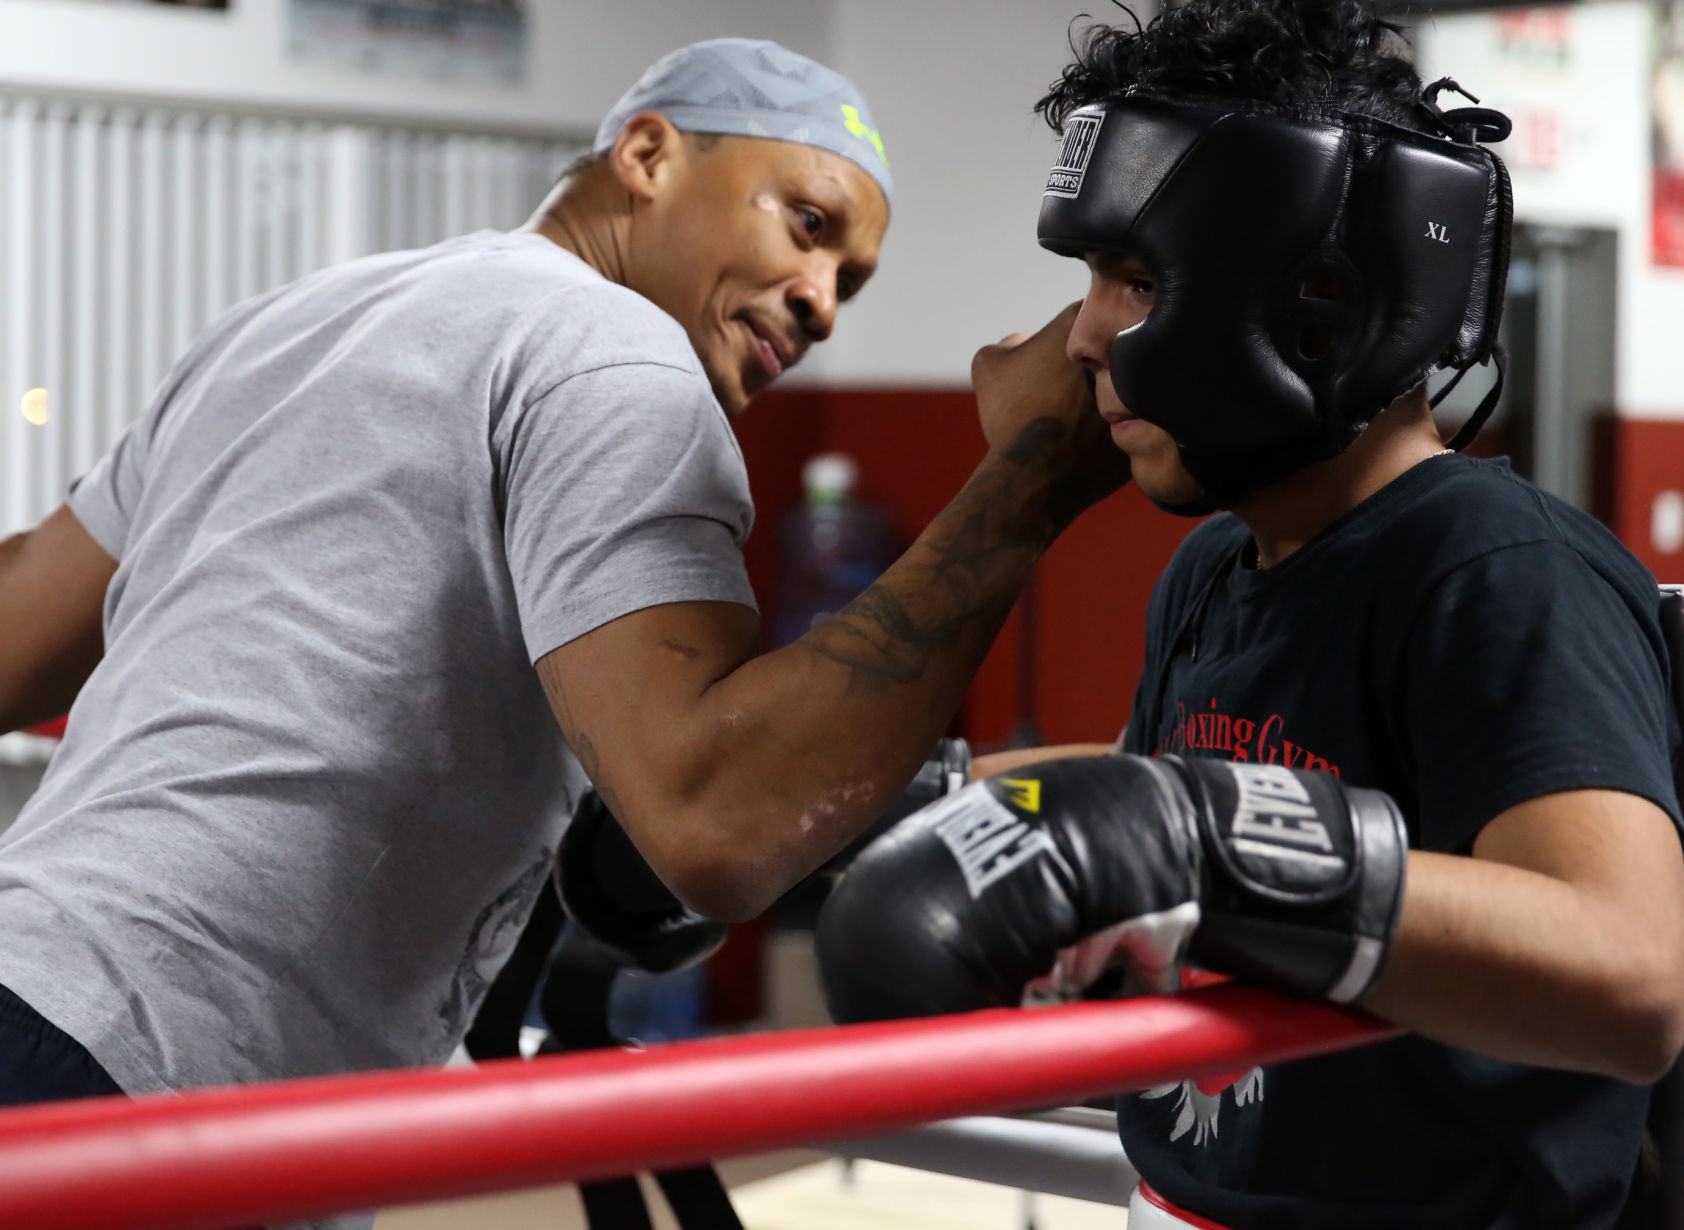 Carr Boxing Gym trains fighters, plans fight nights across Region